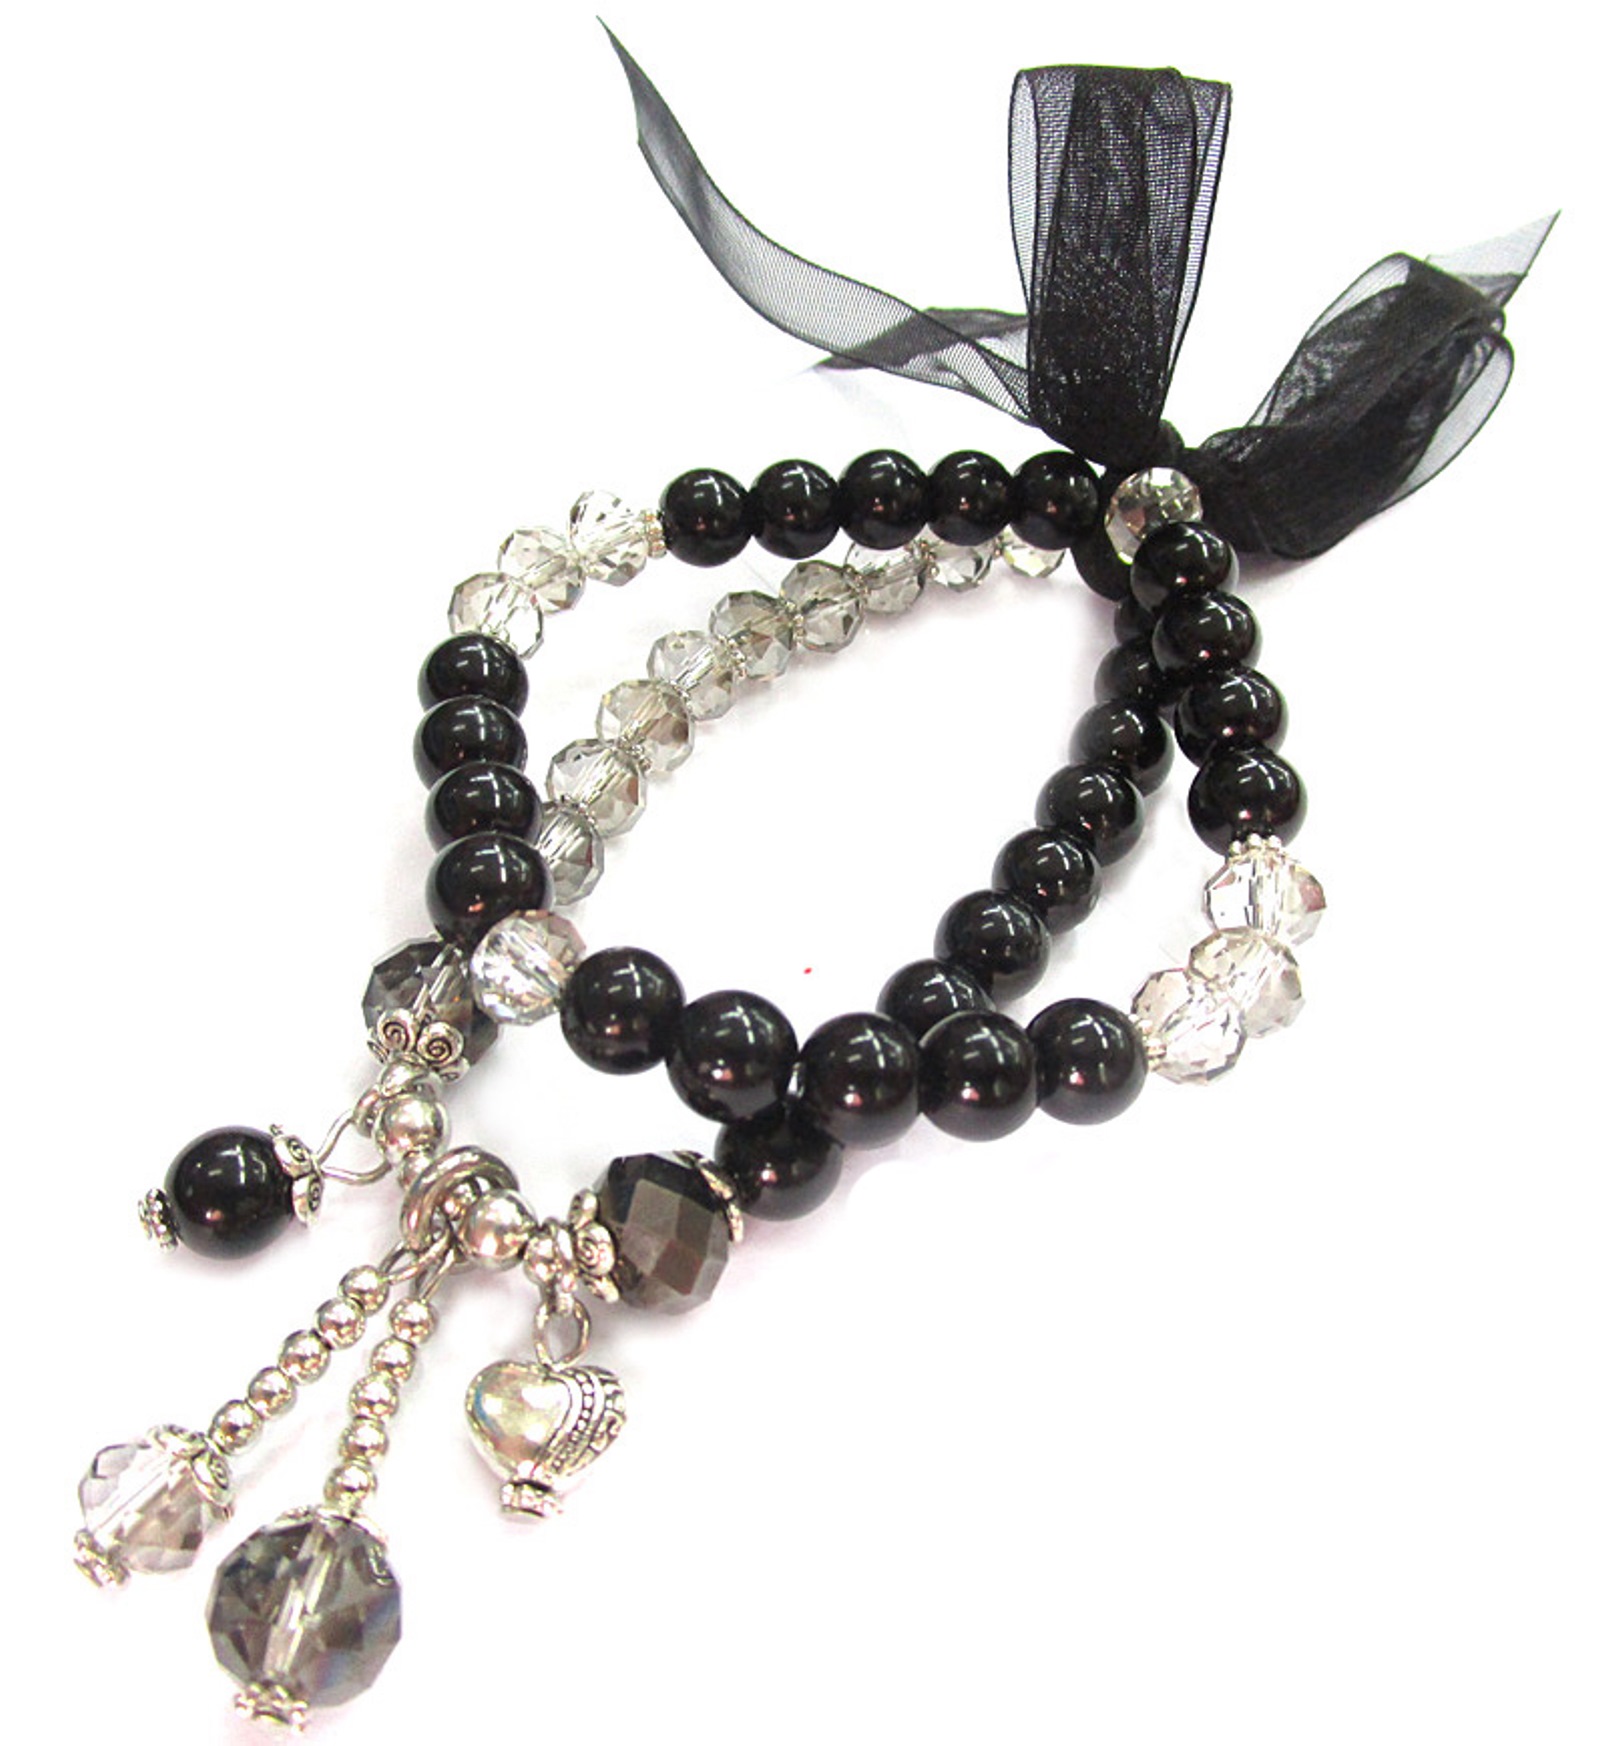 2 Piece Set Stretch Bracelets with Charms in 8mm Simulated Black Onyx and Simulated Crystals with Ribbon Bow